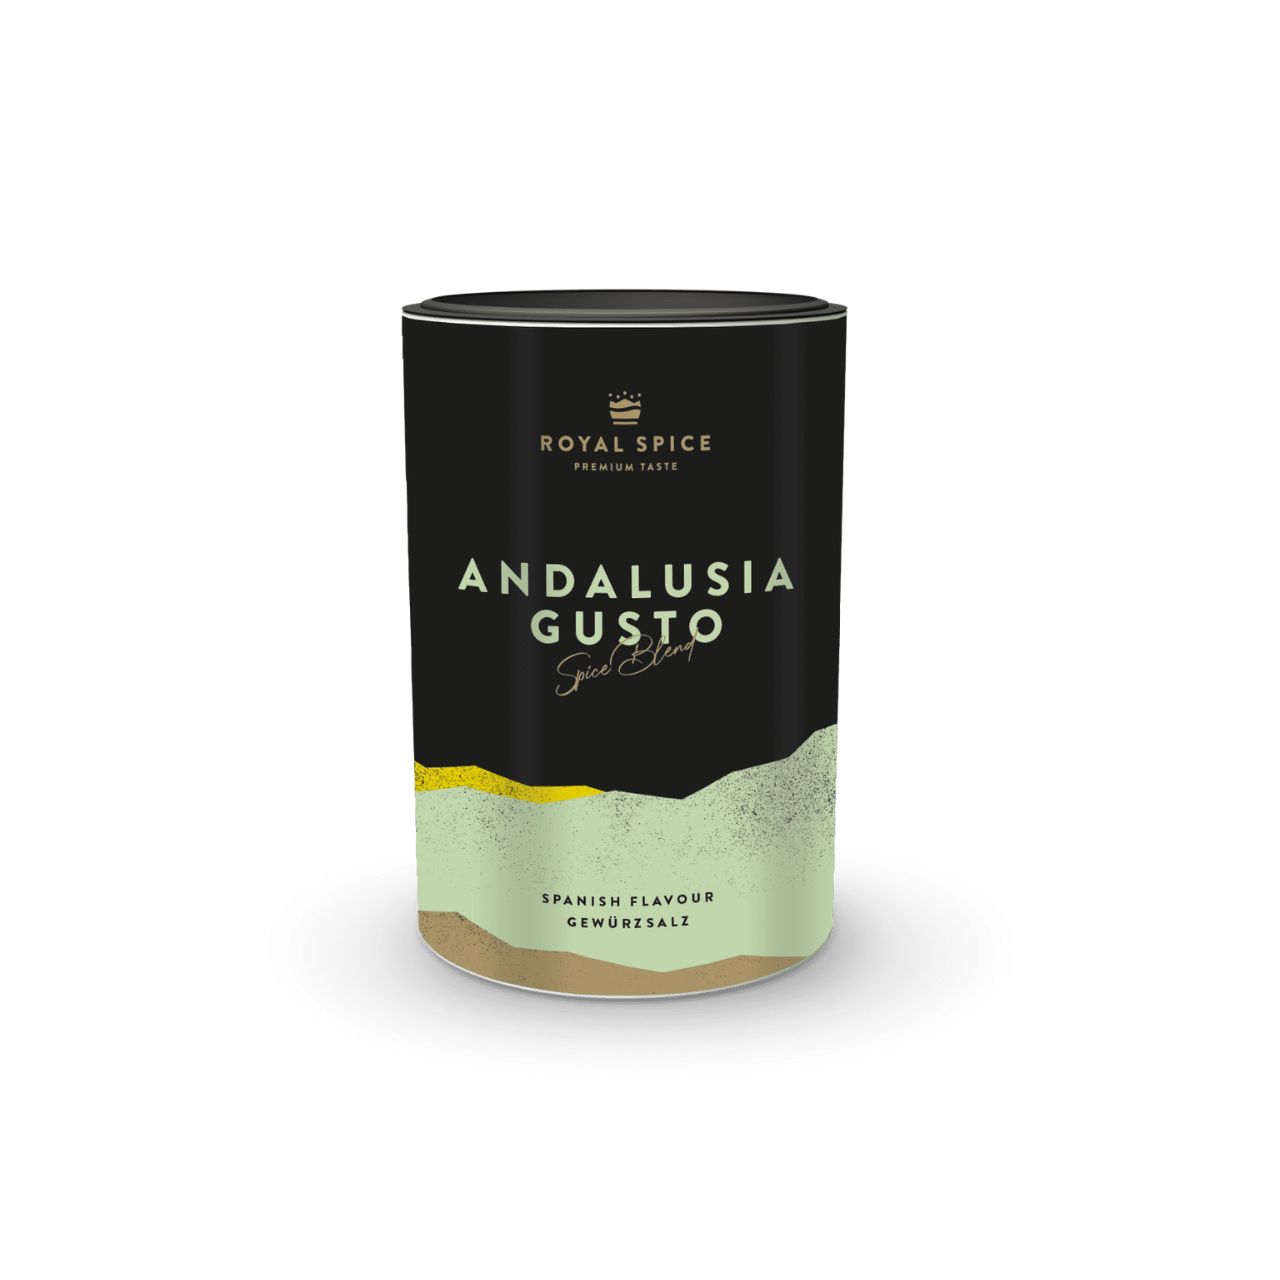 Royal Spice - Andalusia Gusto, 120 g